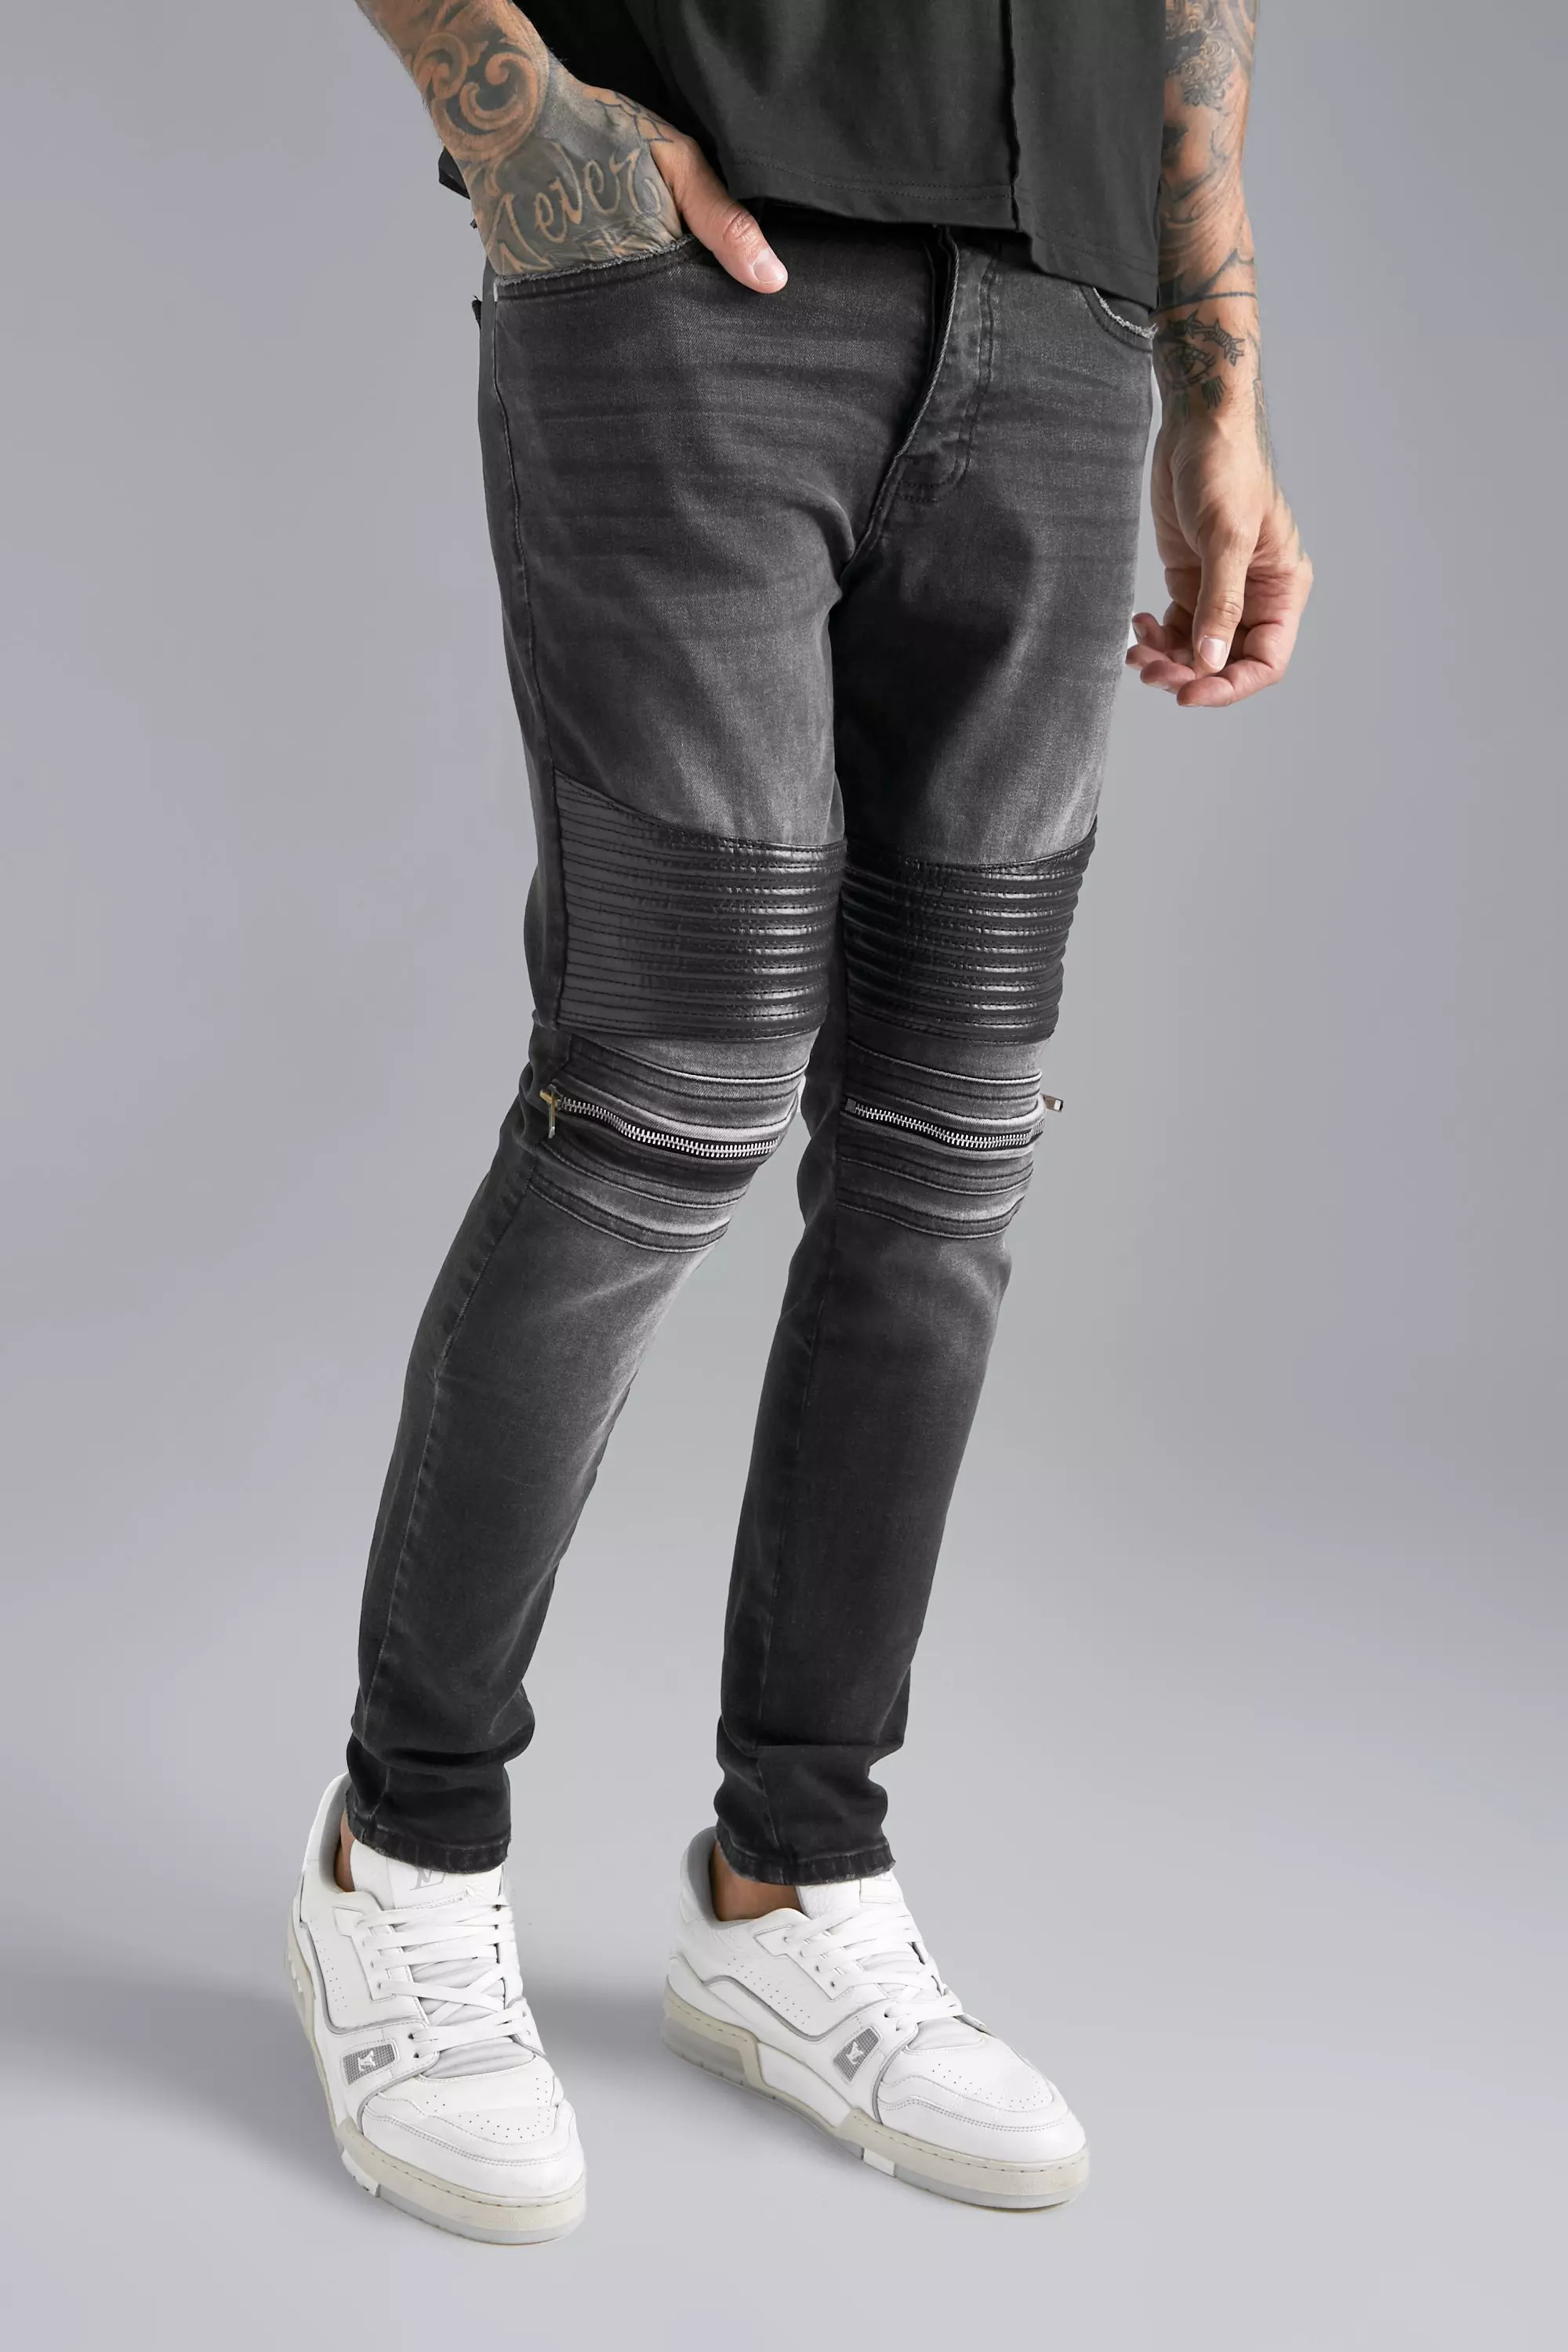 mover rulle For en dagstur Skinny Stretch Biker Zip Detail Jeans | boohooMAN USA